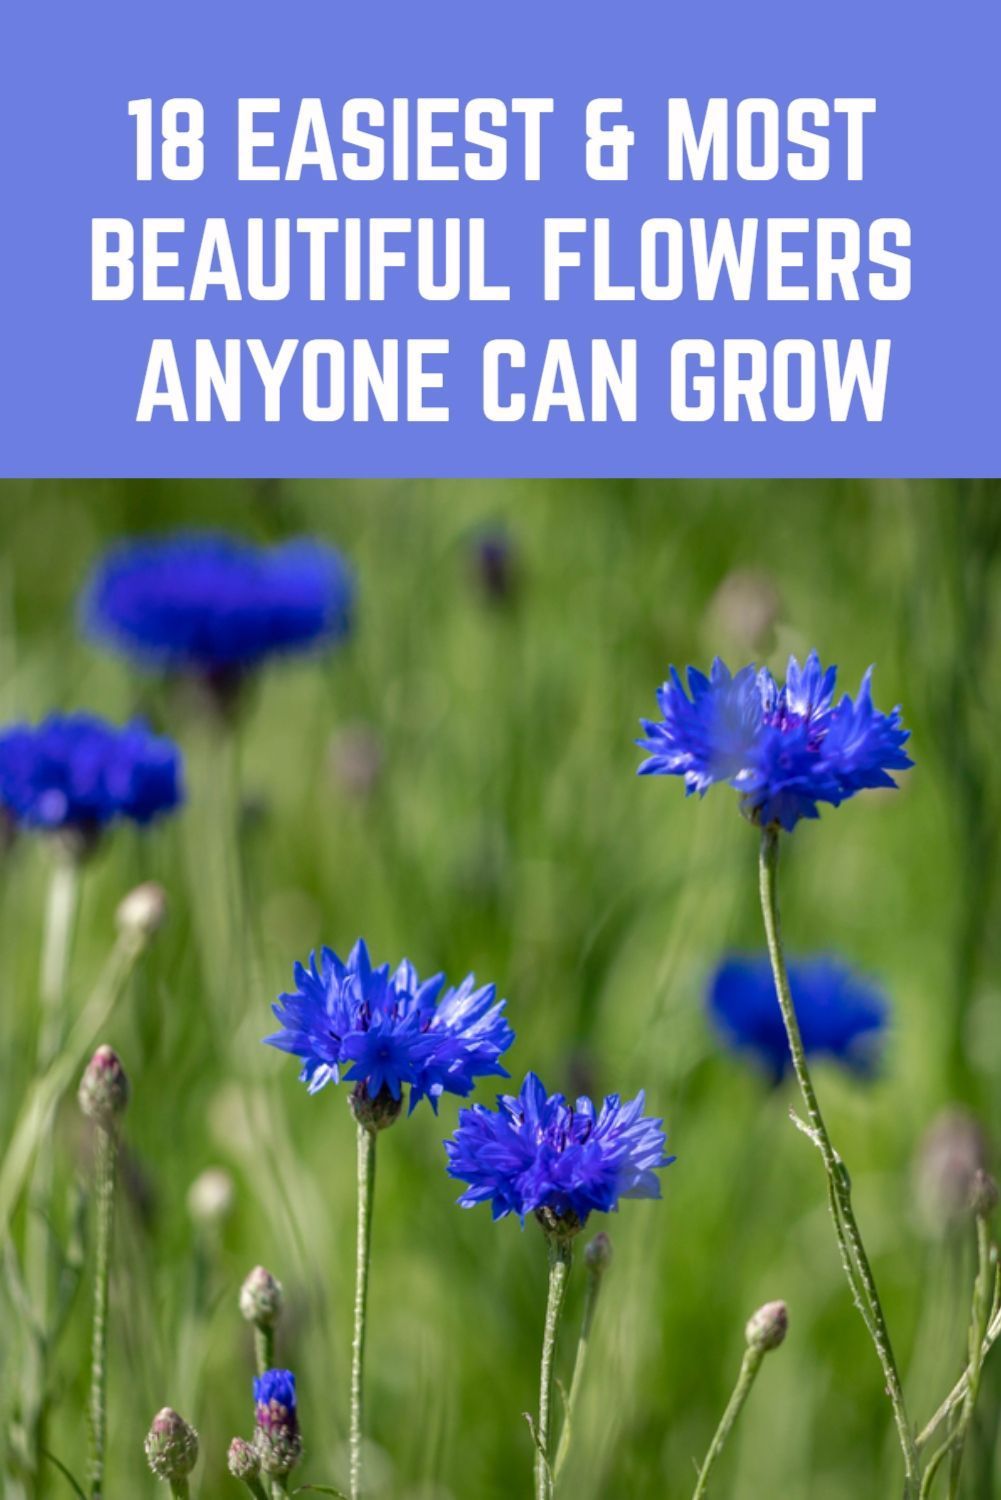 18 Easiest & Most Beautiful Flowers Anyone Can Grow In Their Garden - 18 Easiest & Most Beautiful Flowers Anyone Can Grow In Their Garden -   19 beauty Flowers landscapes ideas